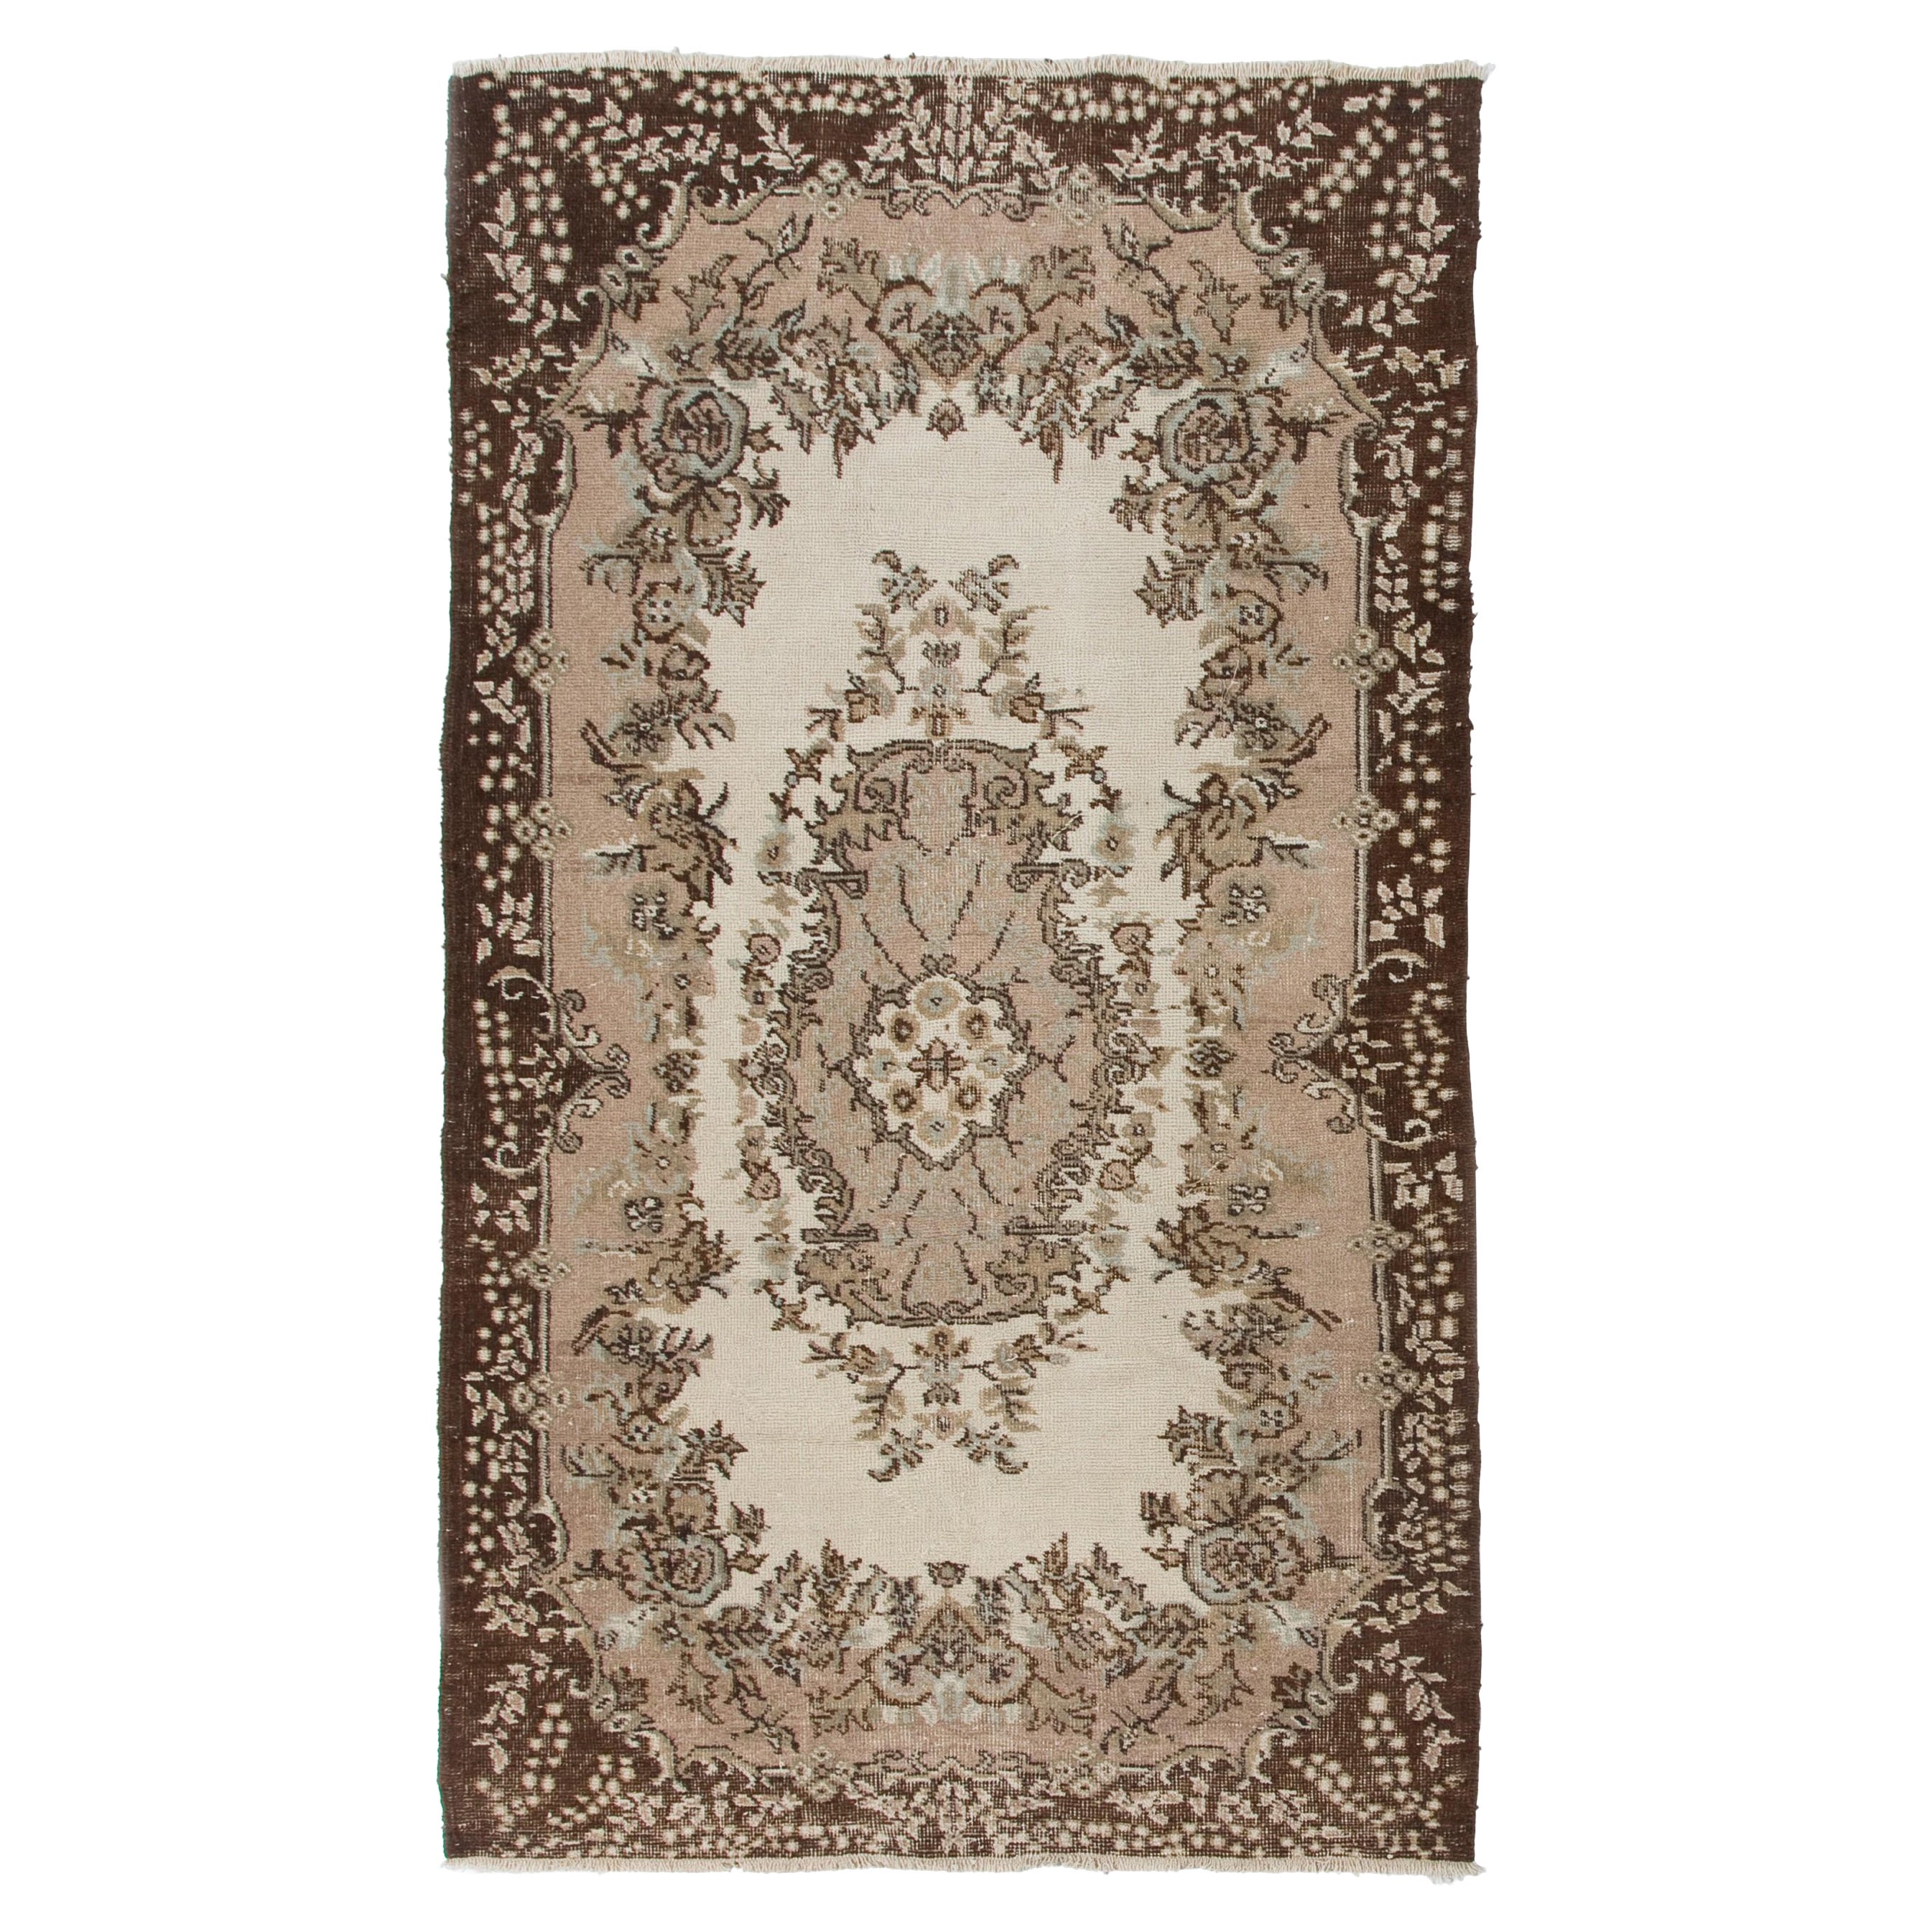  4x7 ft Vintage Anatolian Accent Rug. CA 1960. Wool Carpet in Beige & Brown For Sale